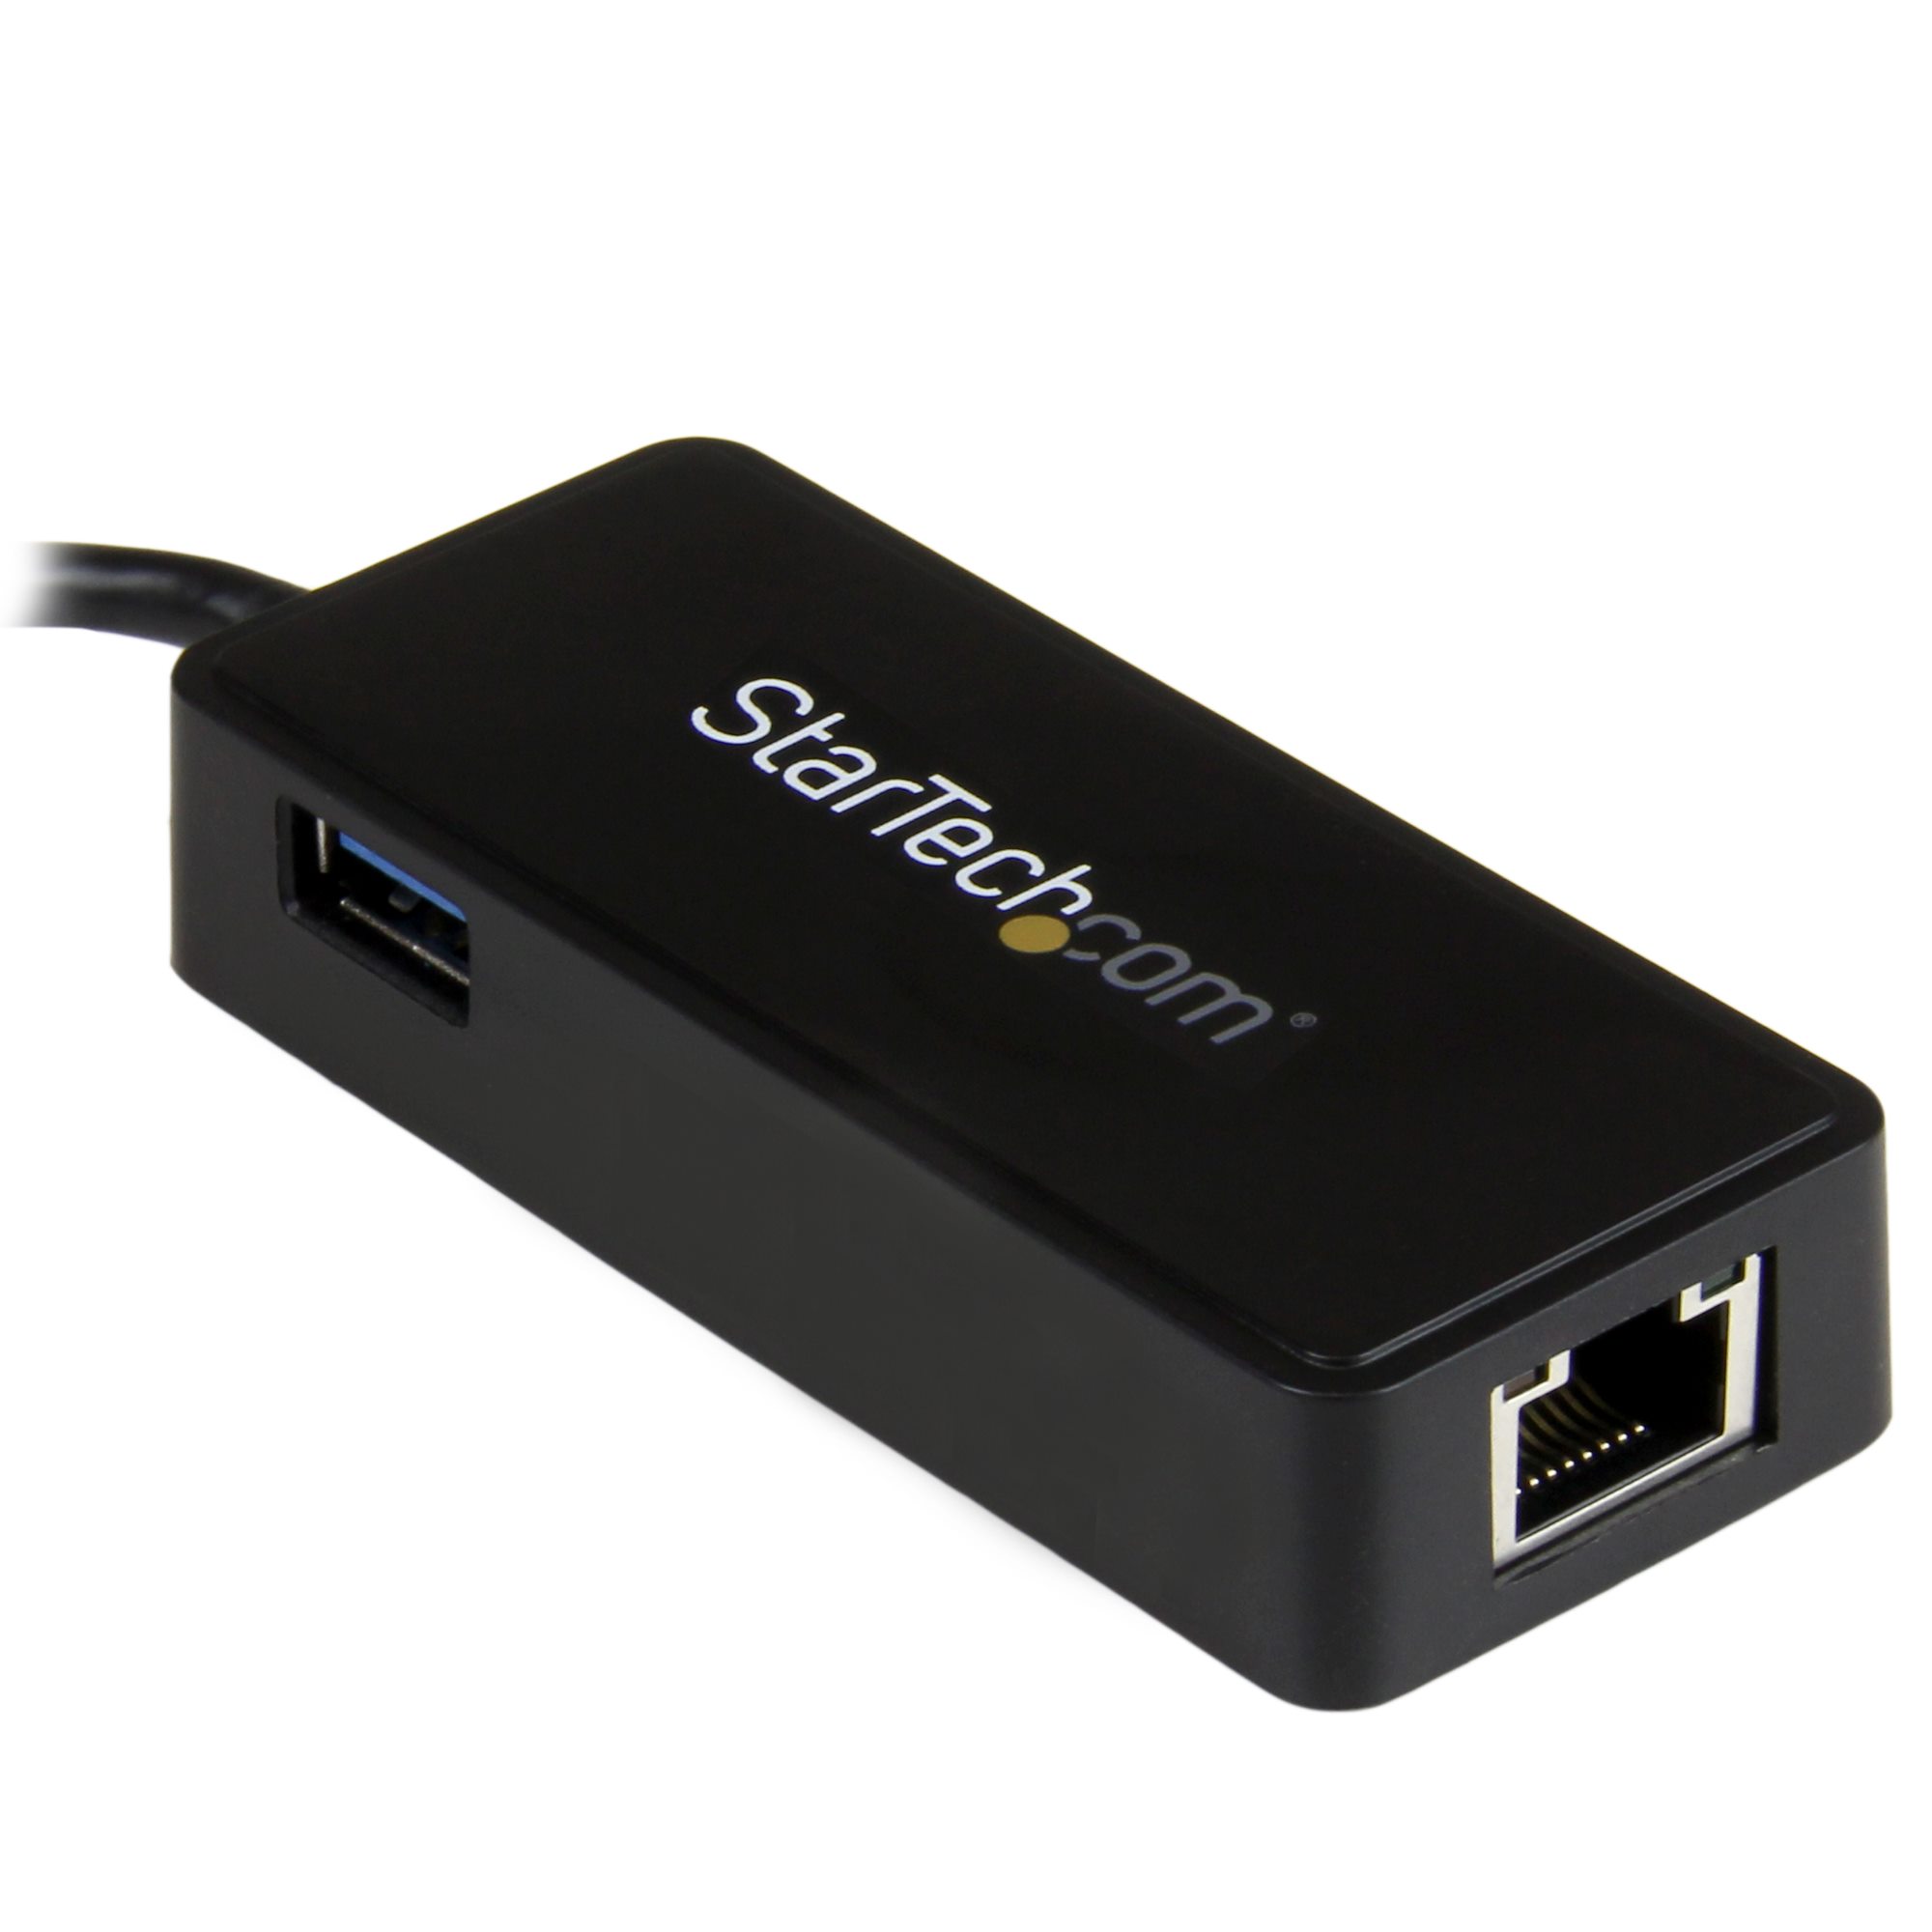 USB-C to GbE Adapter w/ Extra USB port - USB and Thunderbolt 